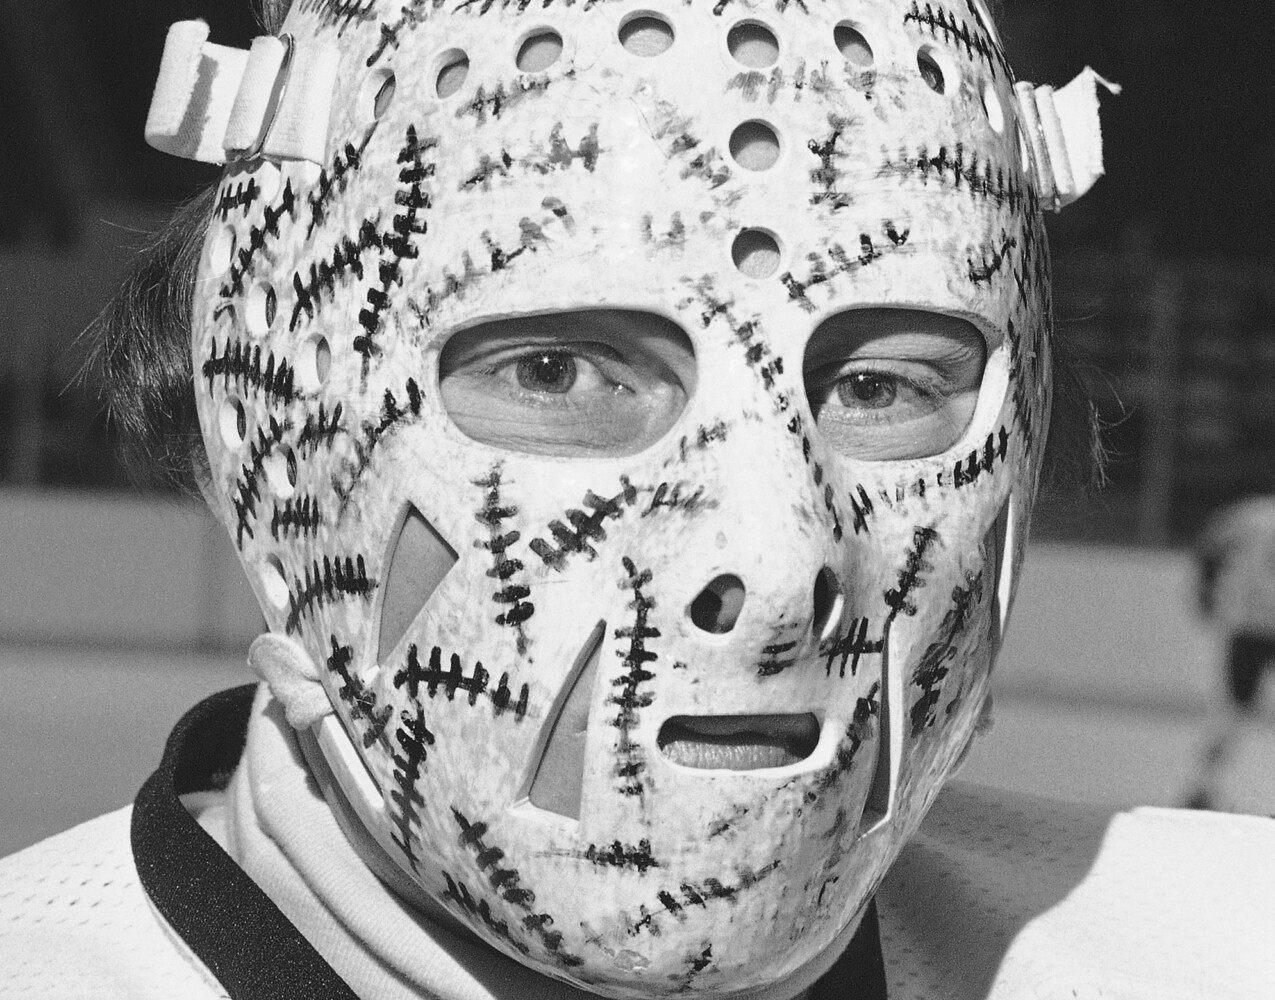 Boston Bruins - Gerry Cheevers and The Mask.